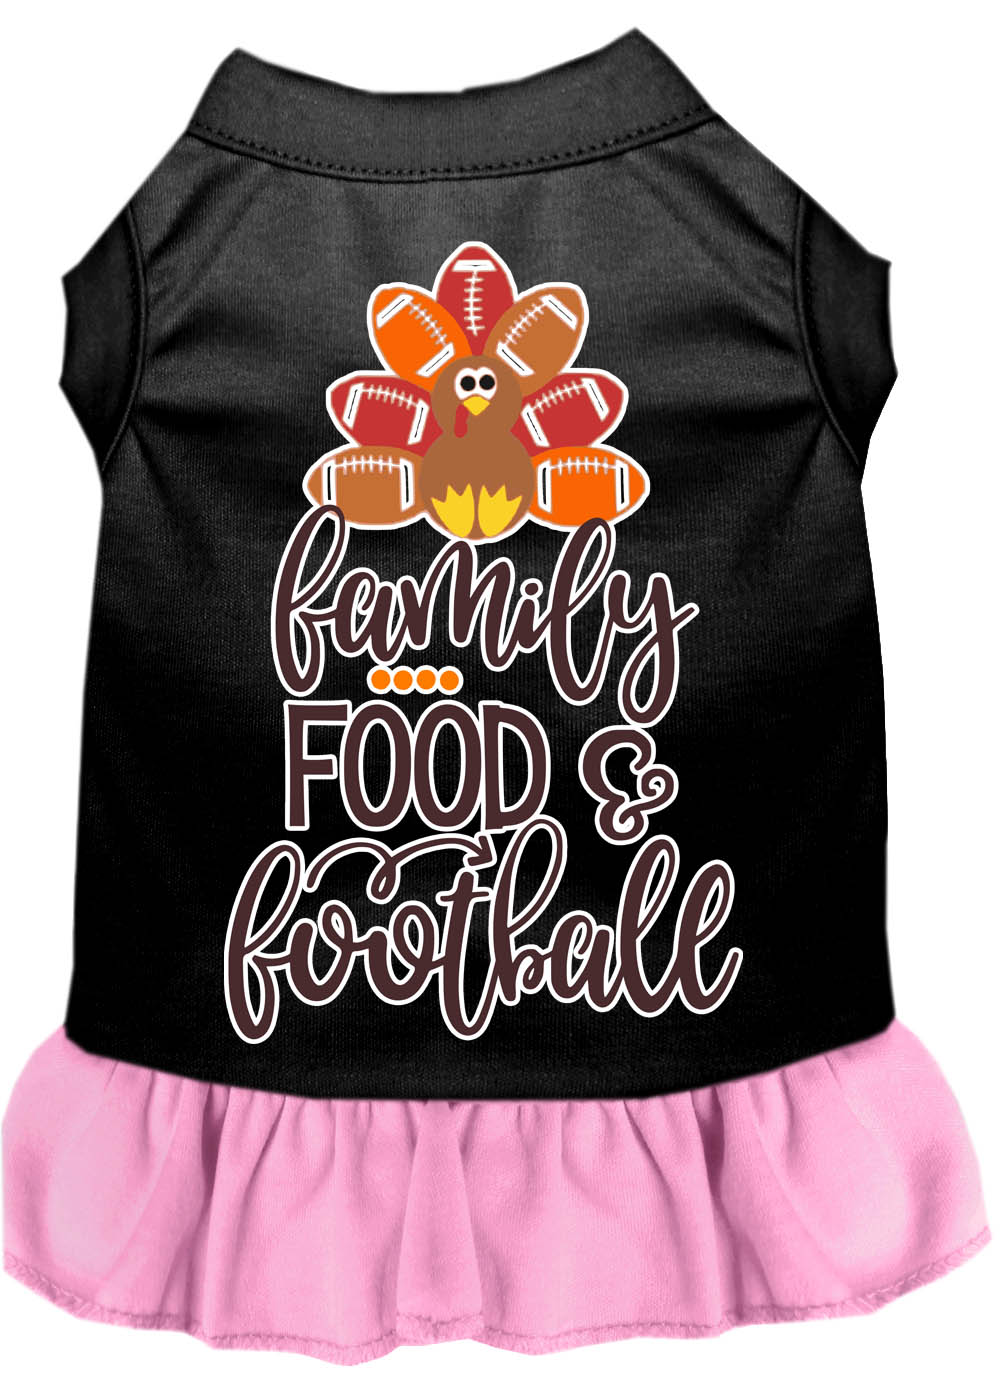 Family, Food, and Football Screen Print Dog Dress Black with Light Pink XXXL